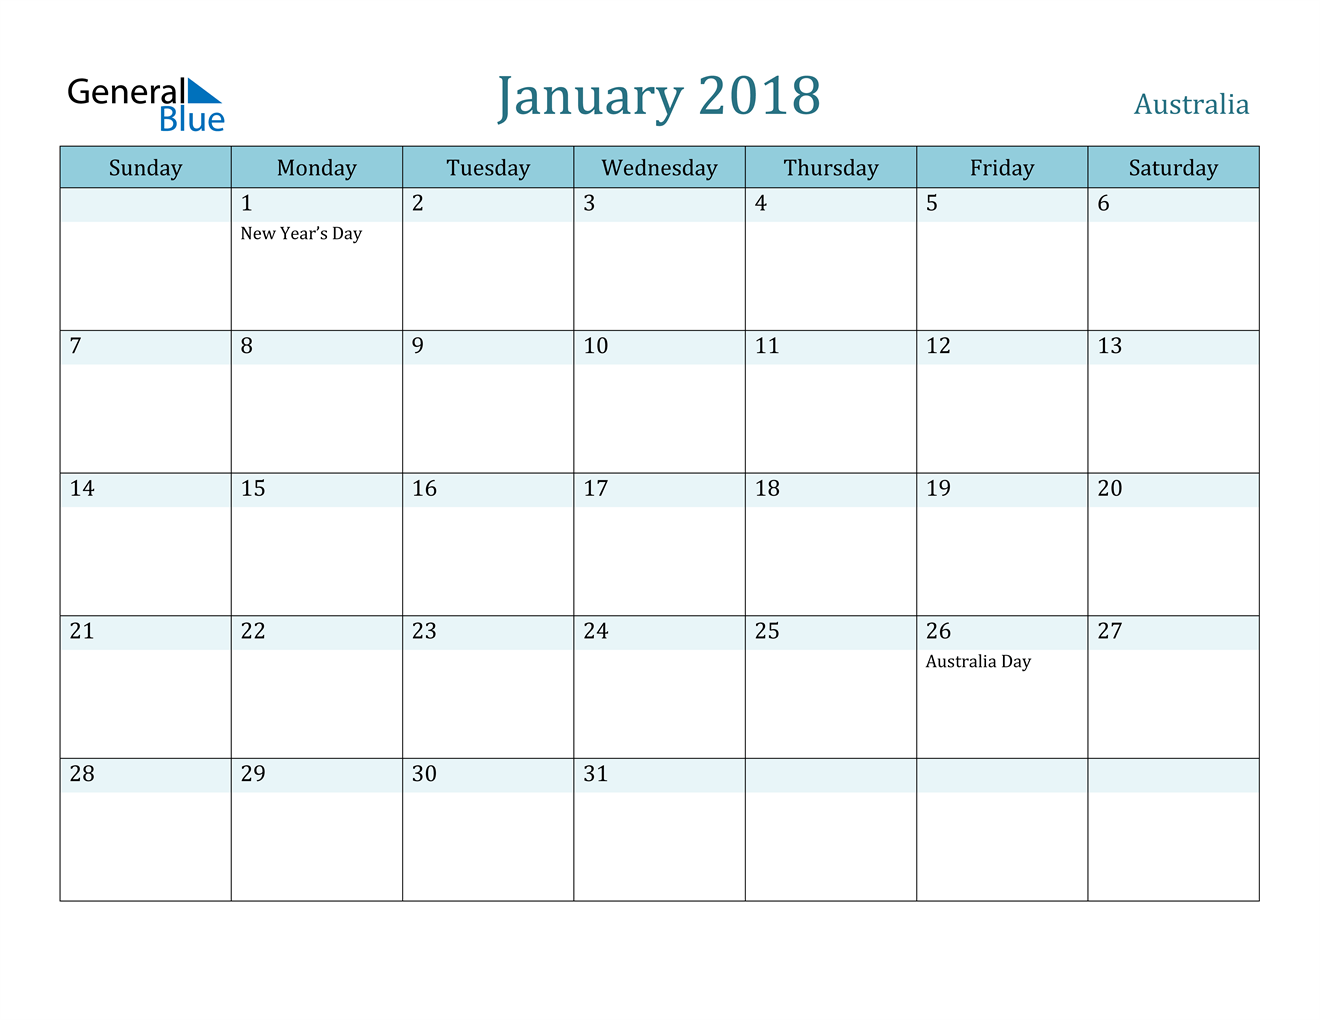 2018-calendar-templates-and-images